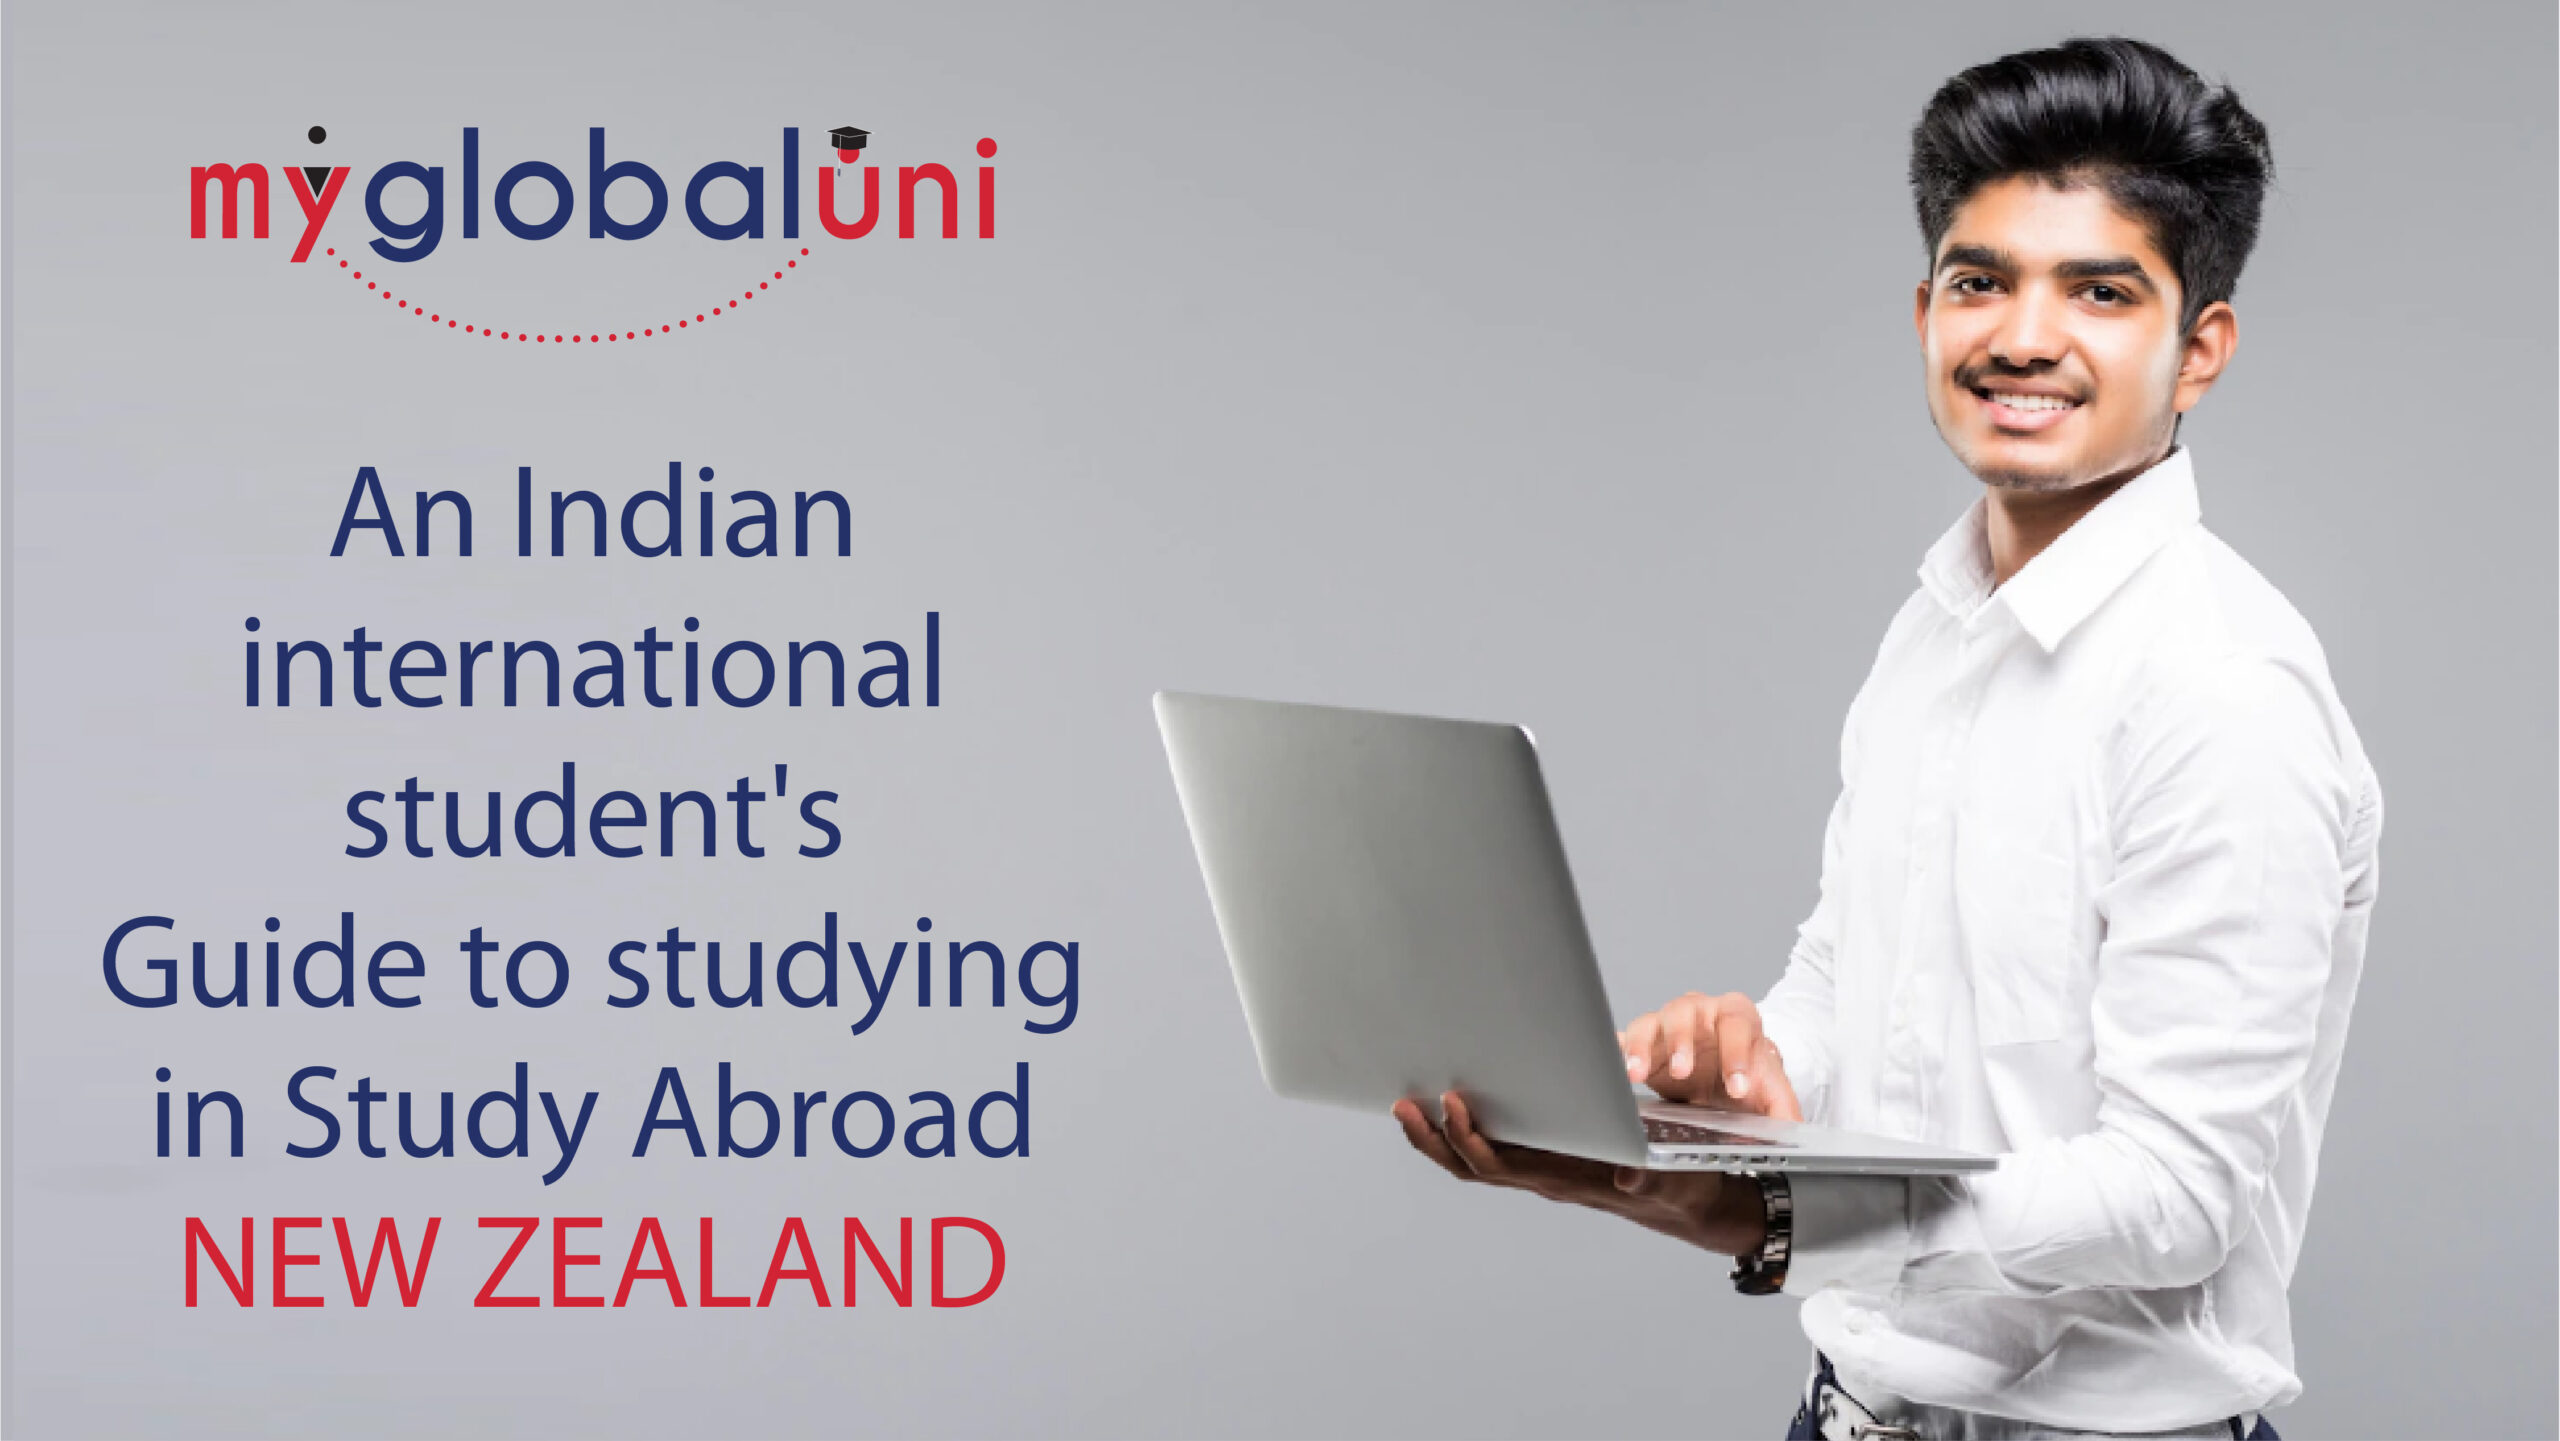 An Indian international student’s Guide to studying in Study Abroad New Zealand